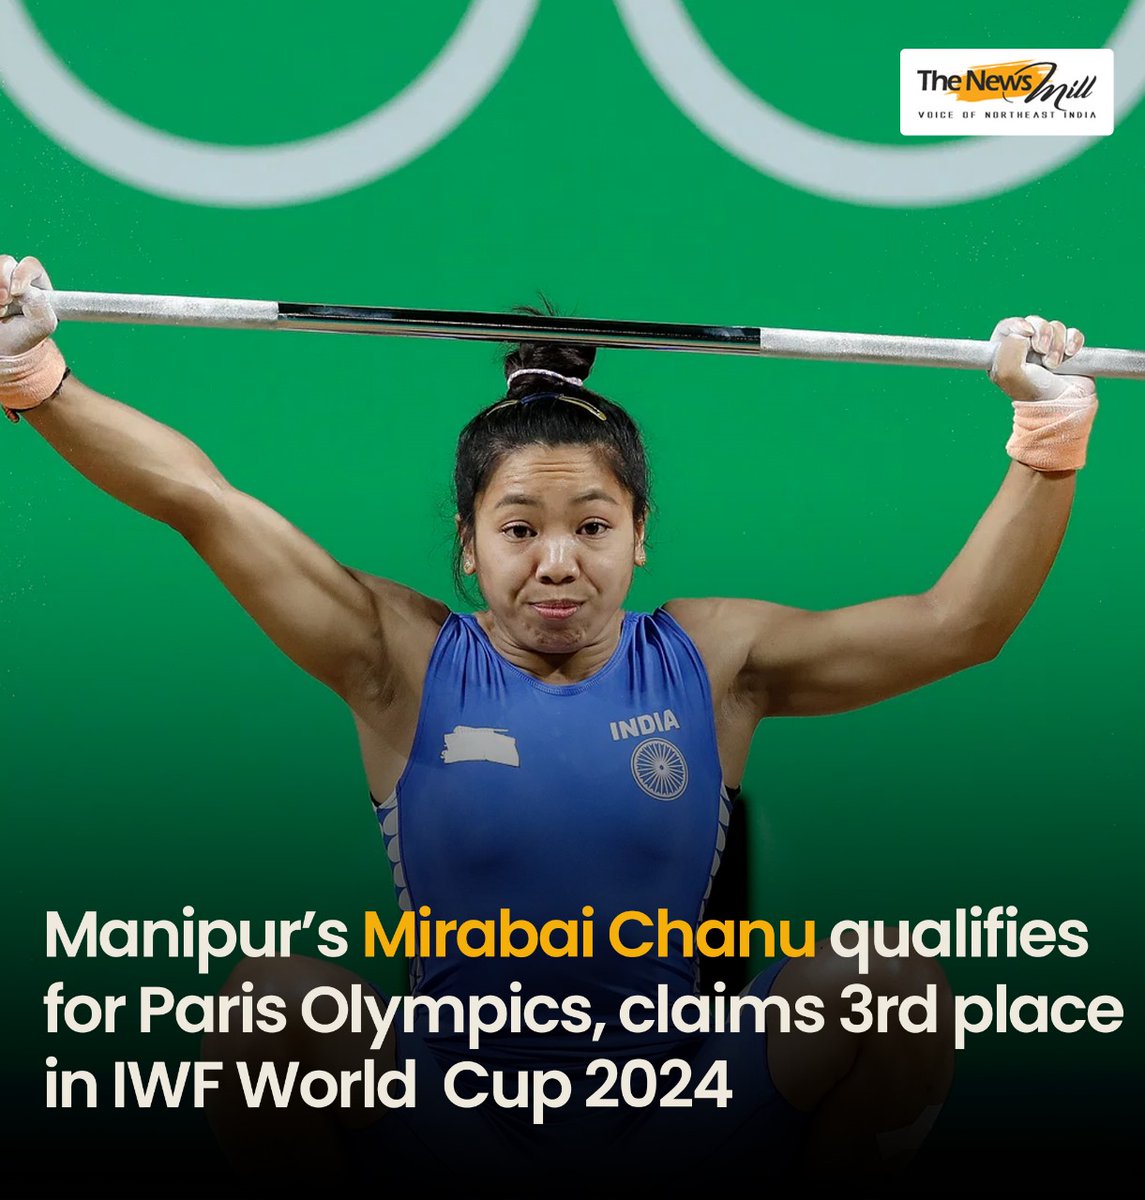 Tokyo Olympics silver-medallist Mirabai Chanu assured her qualification for the 2024 Paris Olympics after finishing third in group B of the women's 49kg event at the IWF World Cup. The official confirmation will be announced after the conclusion of the world cup. #Manipur…